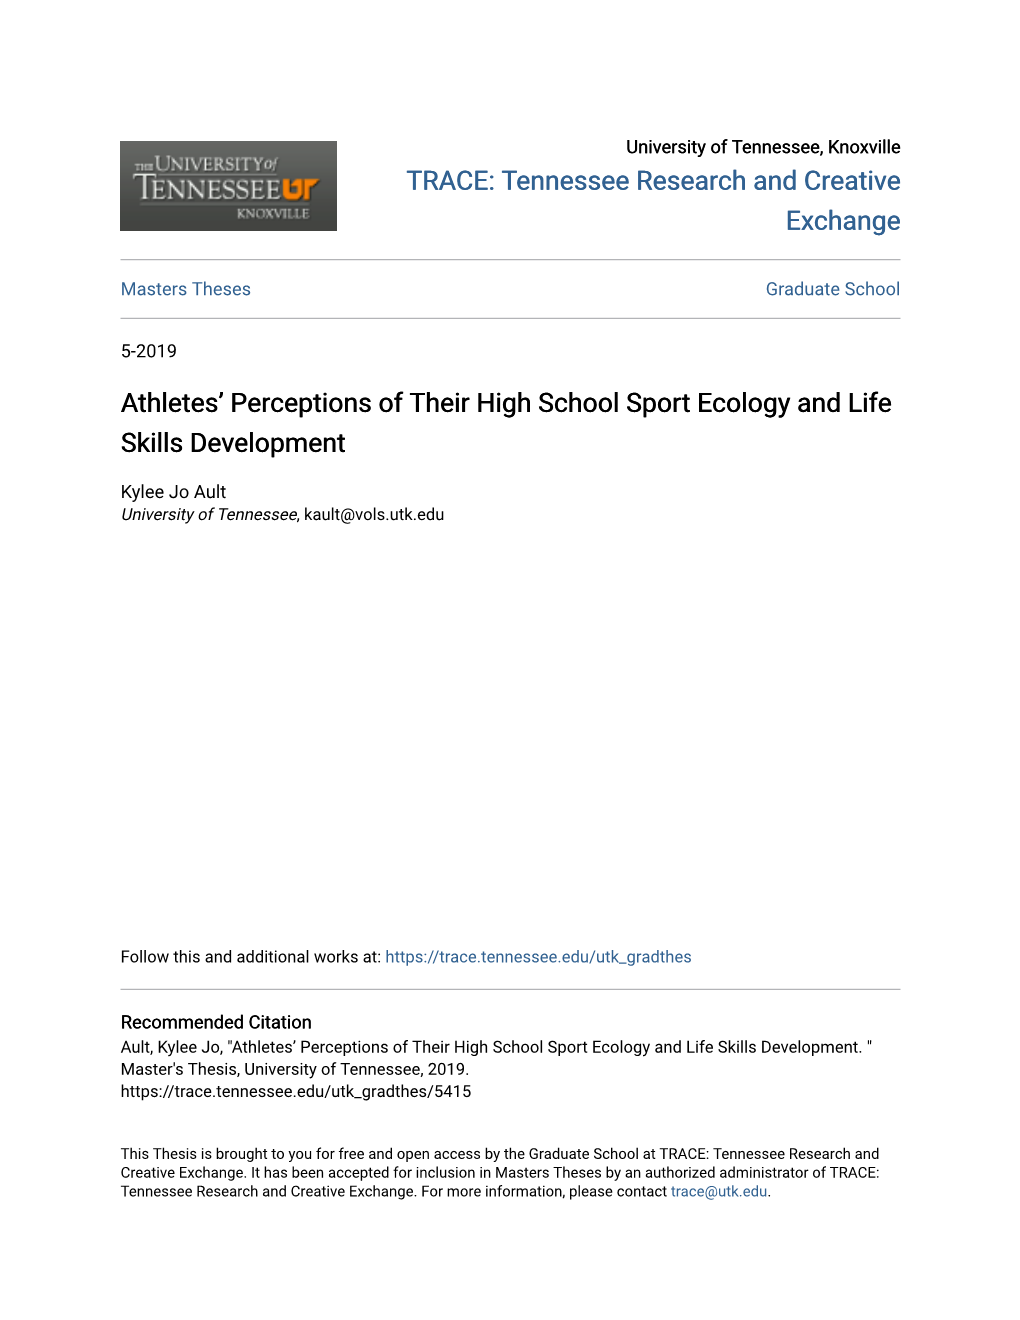 Athletes' Perceptions of Their High School Sport Ecology and Life Skills Development